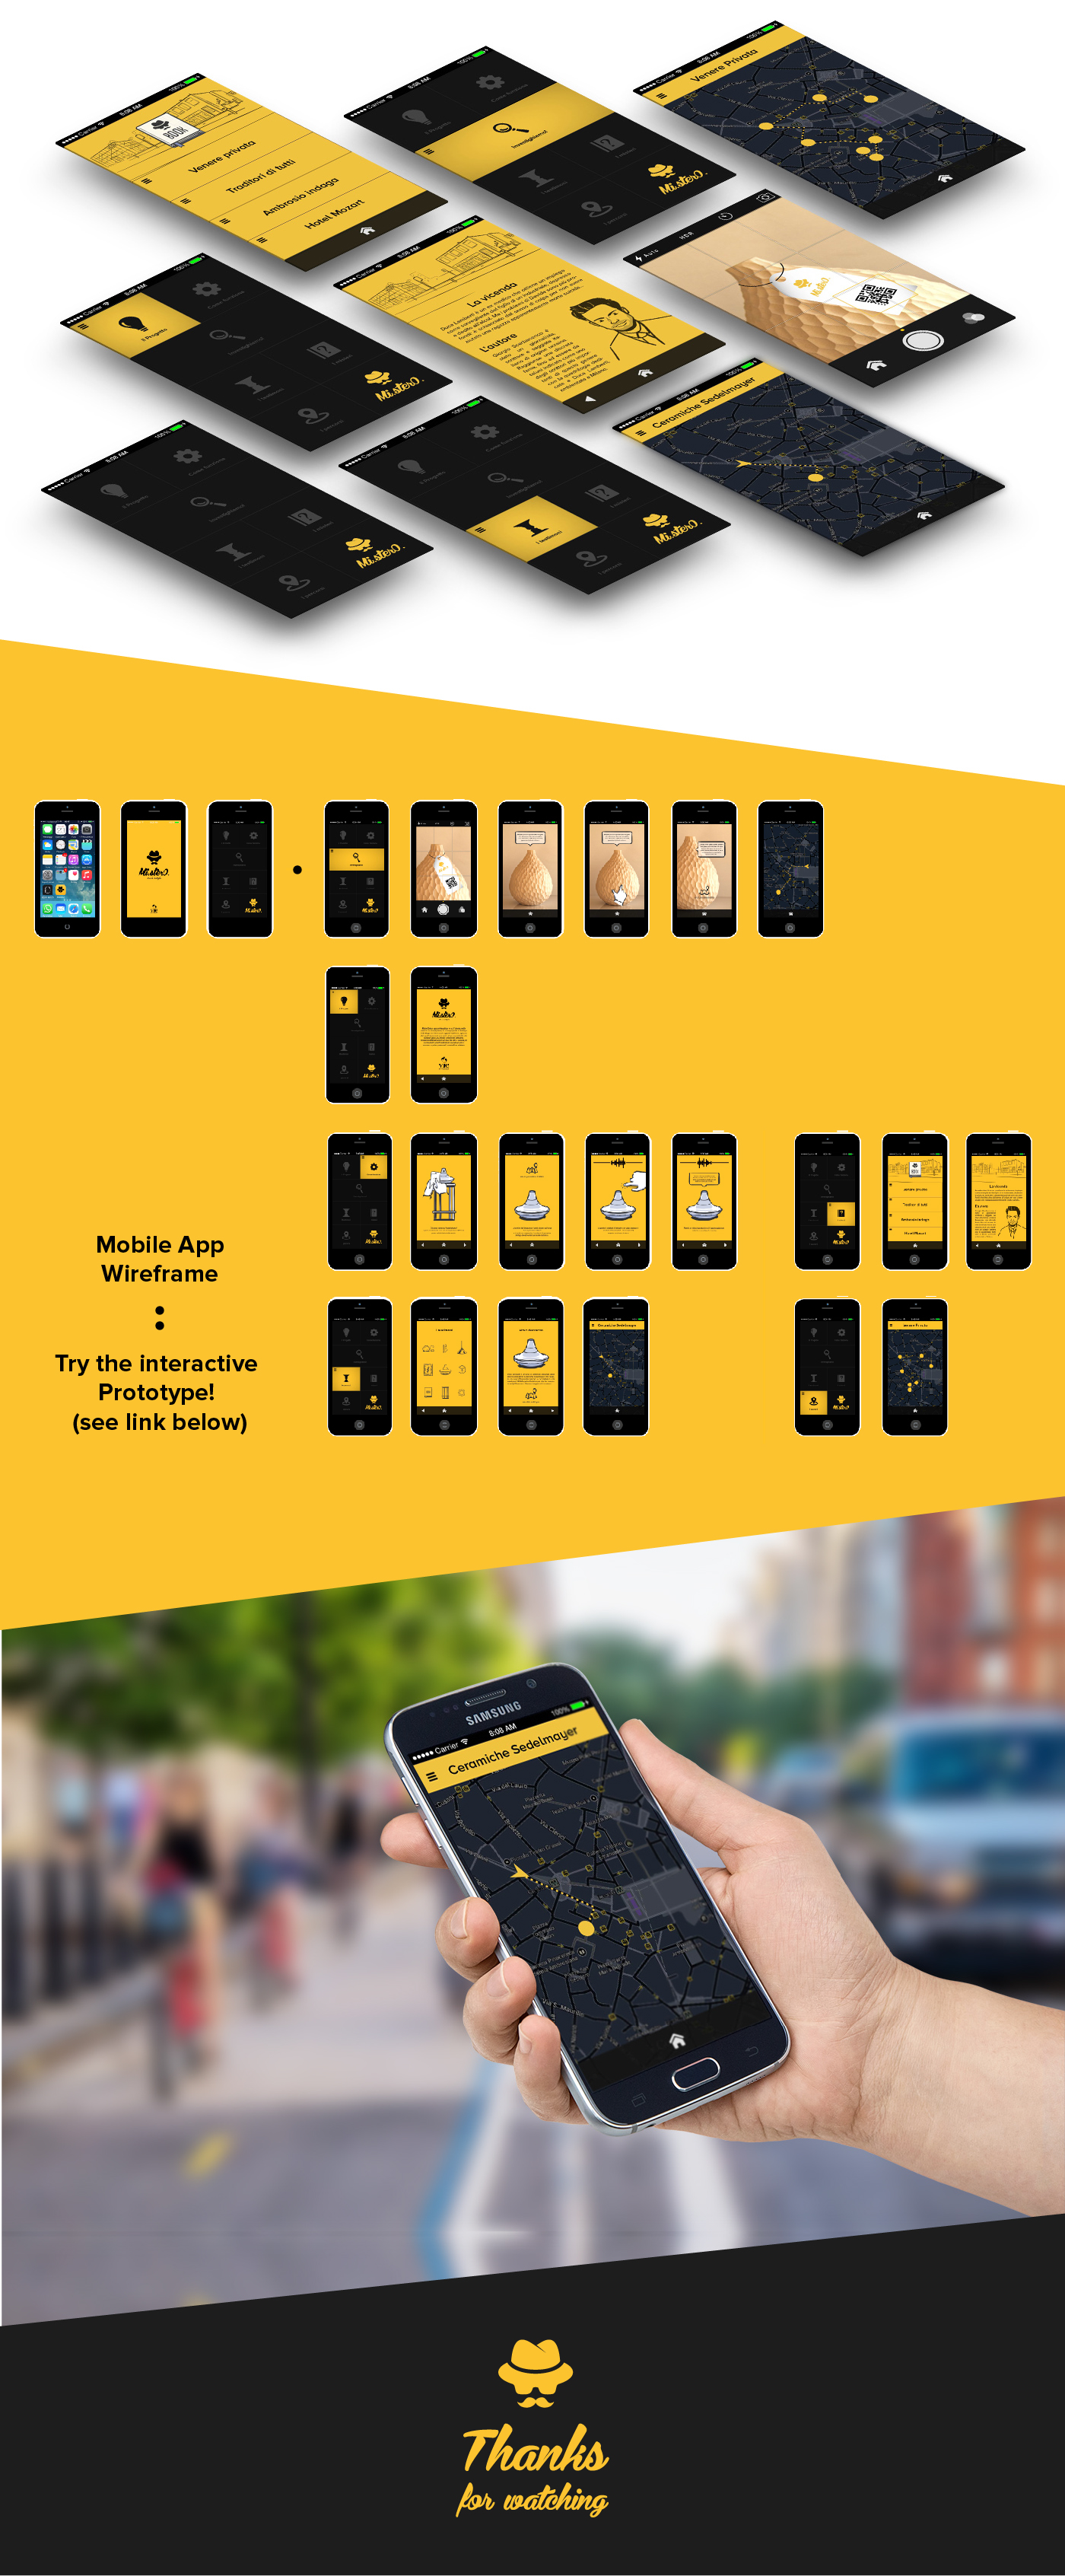 mobile experience Mobile Technology mobile user experience app prototype Mockup yellow mistery interaction user interface Mobile app